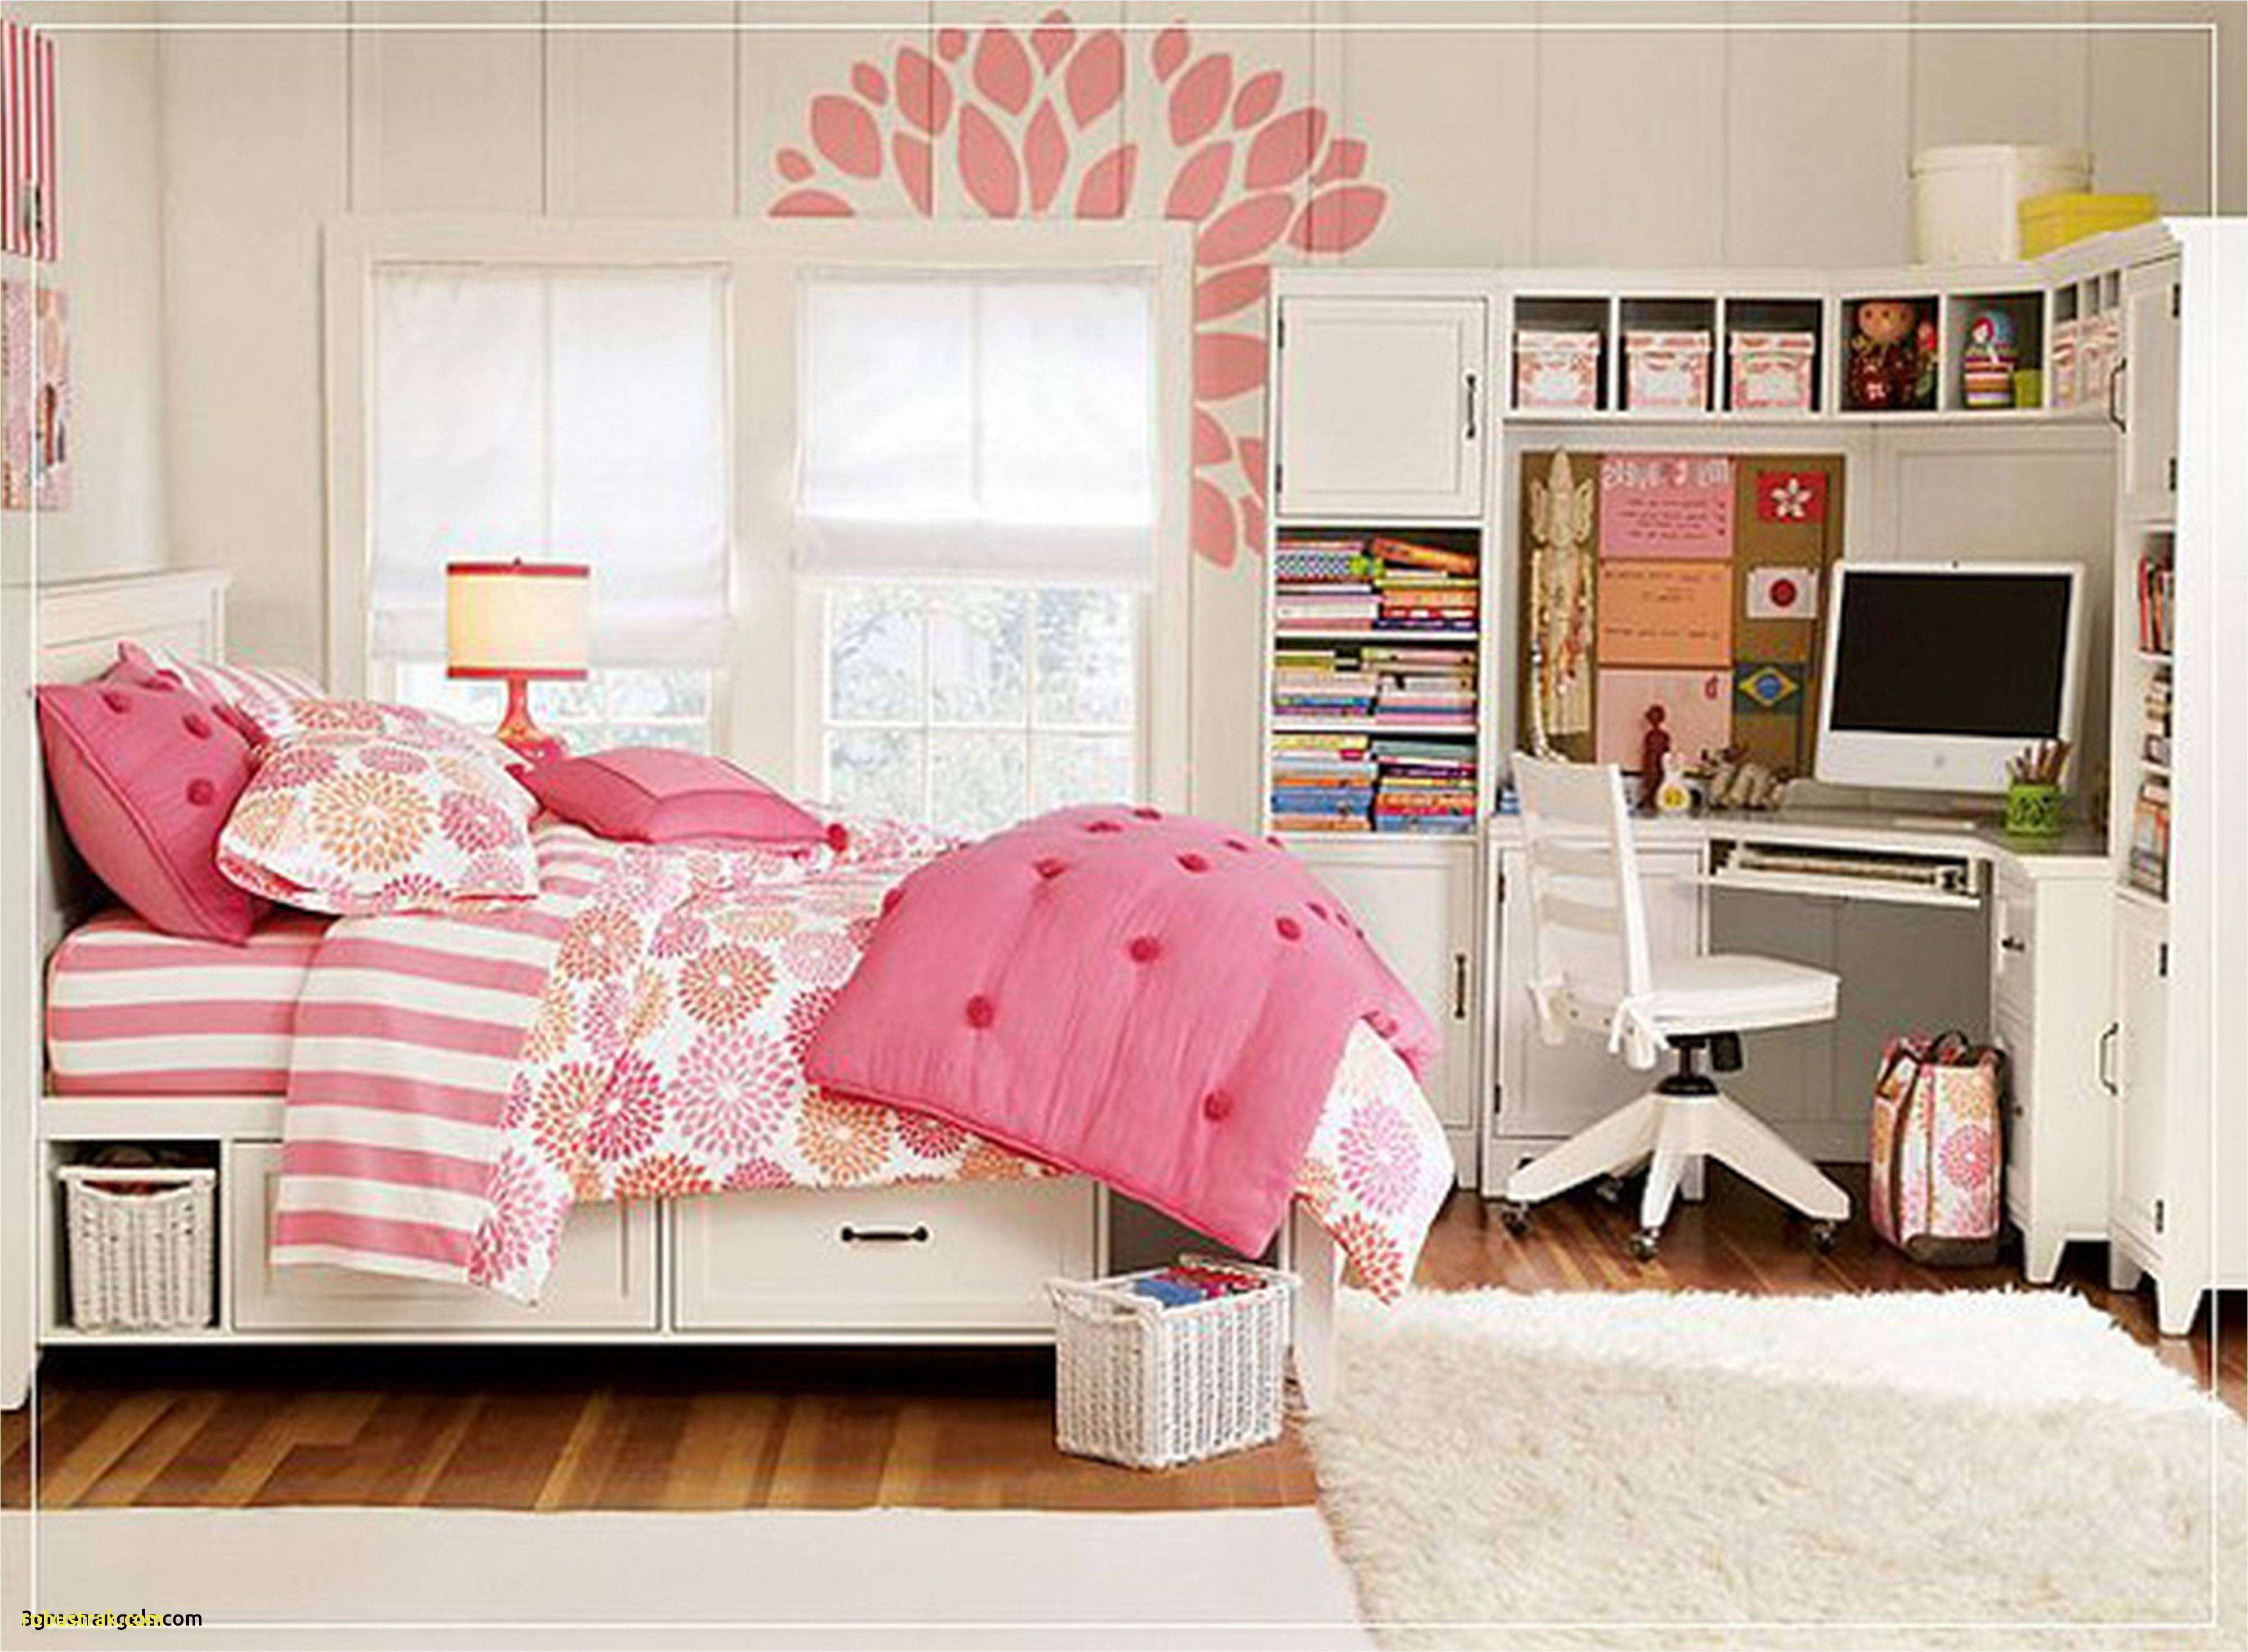 Teenage Bedroom Color Ideas Adorable Decorating Kids Room for size 4250 X 3124